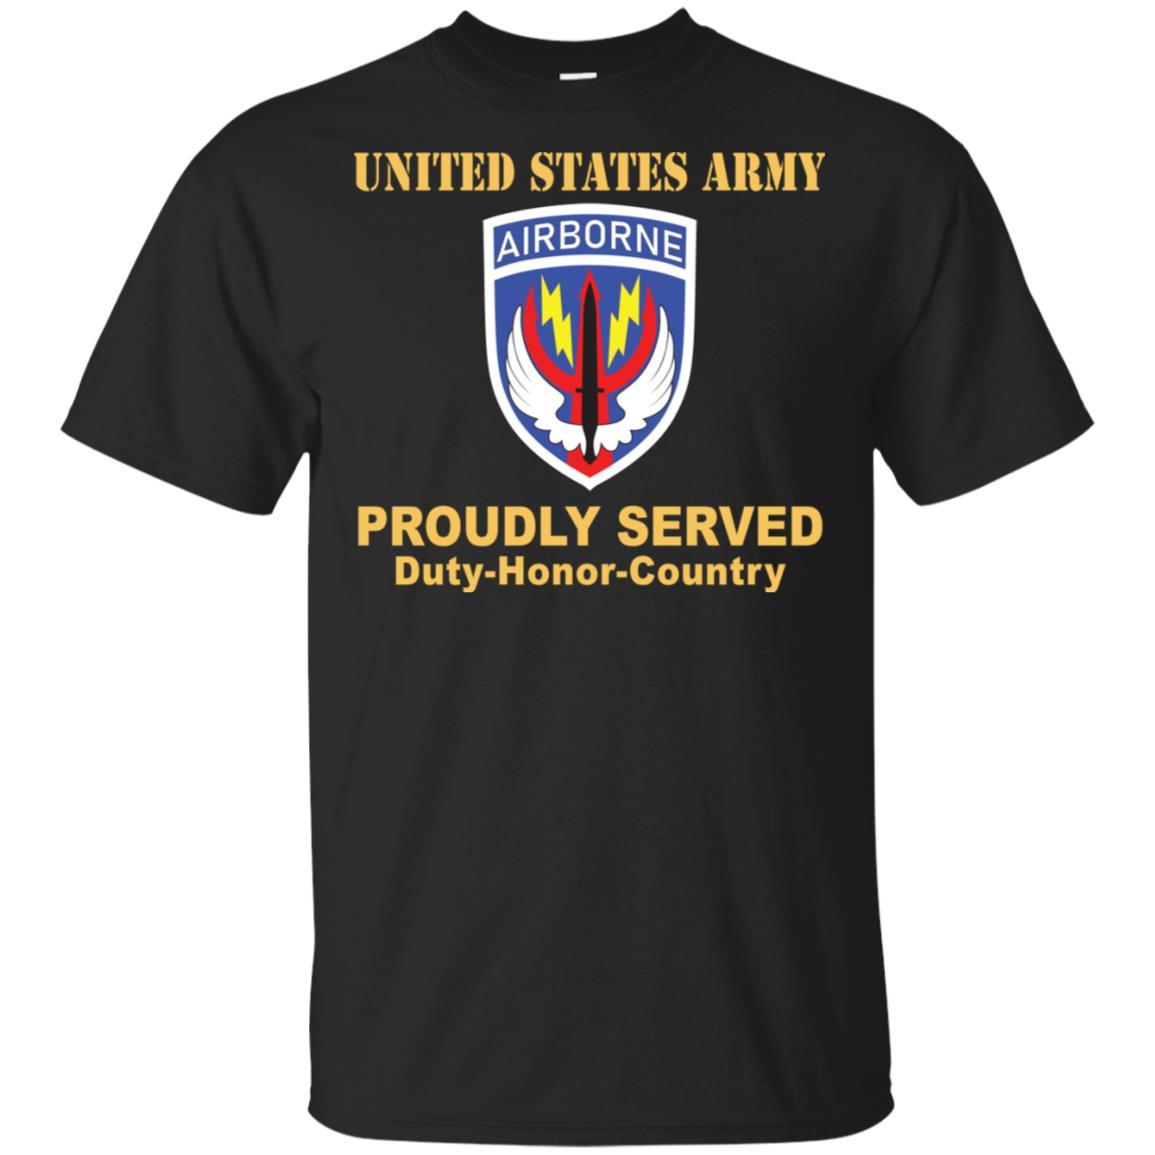 US ARMY SPECIAL OPERATIONS COMMAND CENTRAL- Proudly Served T-Shirt On Front For Men-TShirt-Army-Veterans Nation